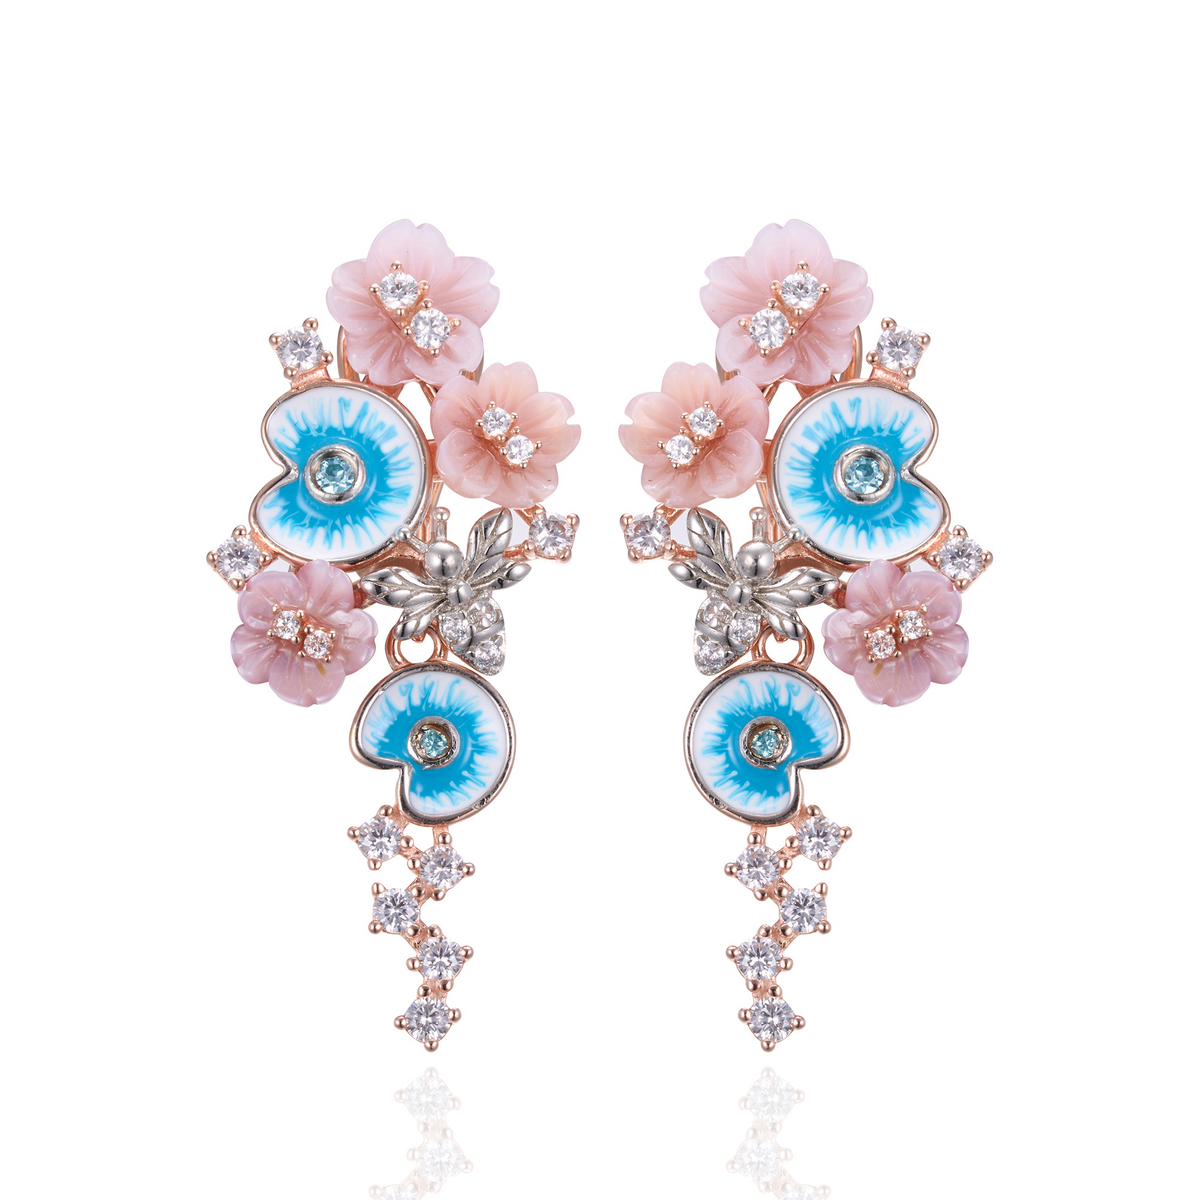 A pair of pink gold plated earrings with pearls, enamel and shell flowers.